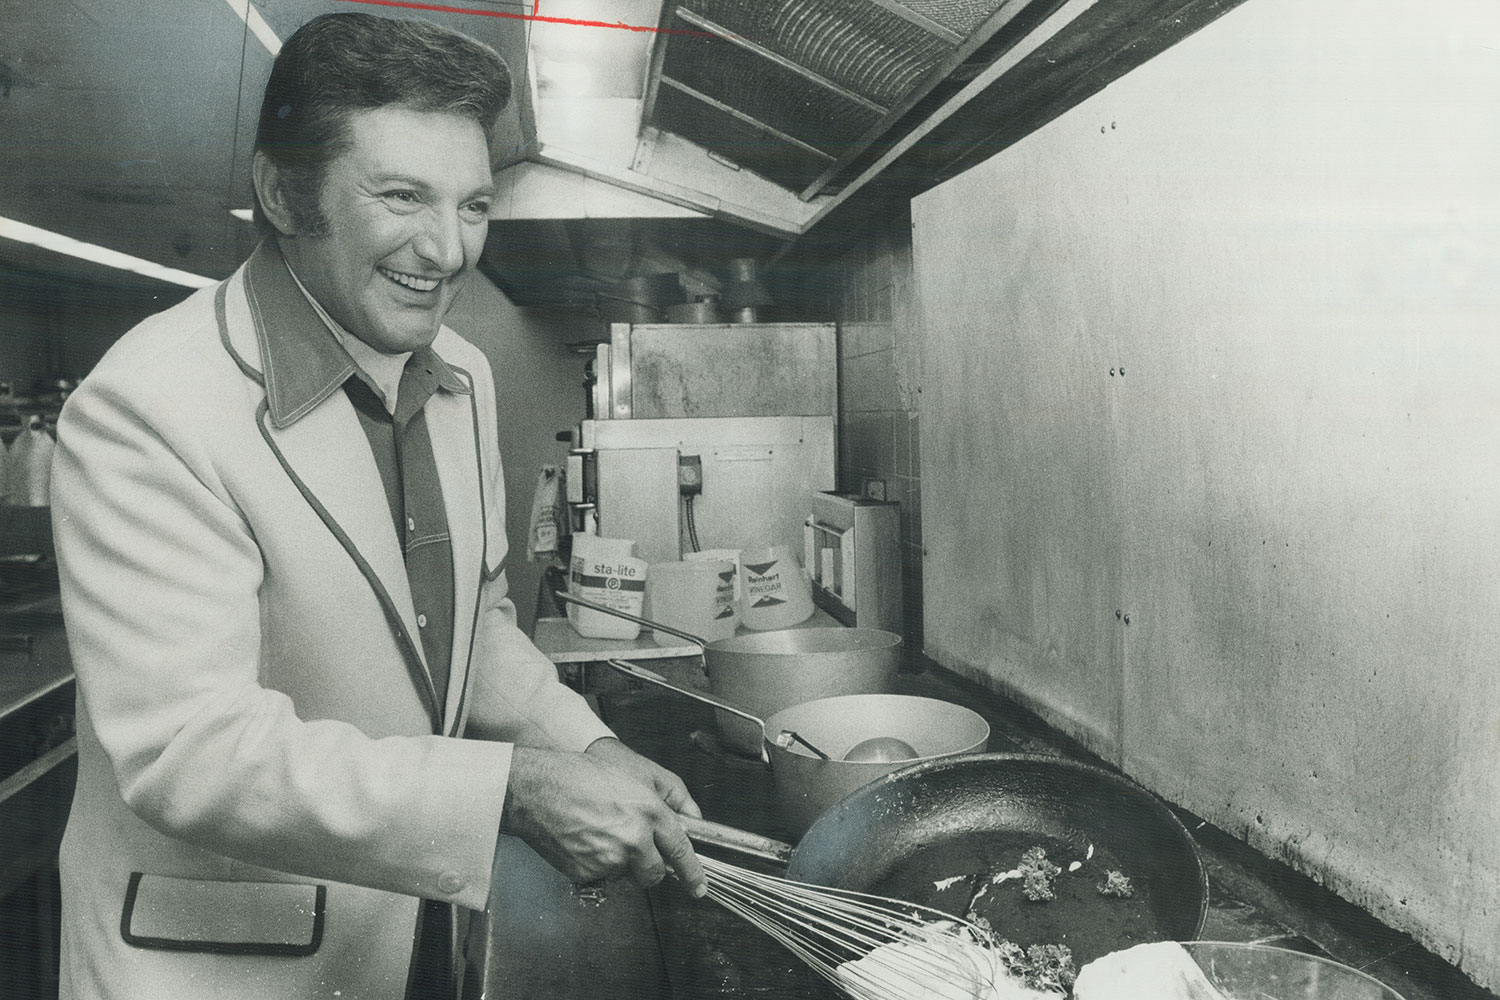 EC:  assets%2Fmessage-editor%2F1469068458138-liberace-cooking-inline-getty